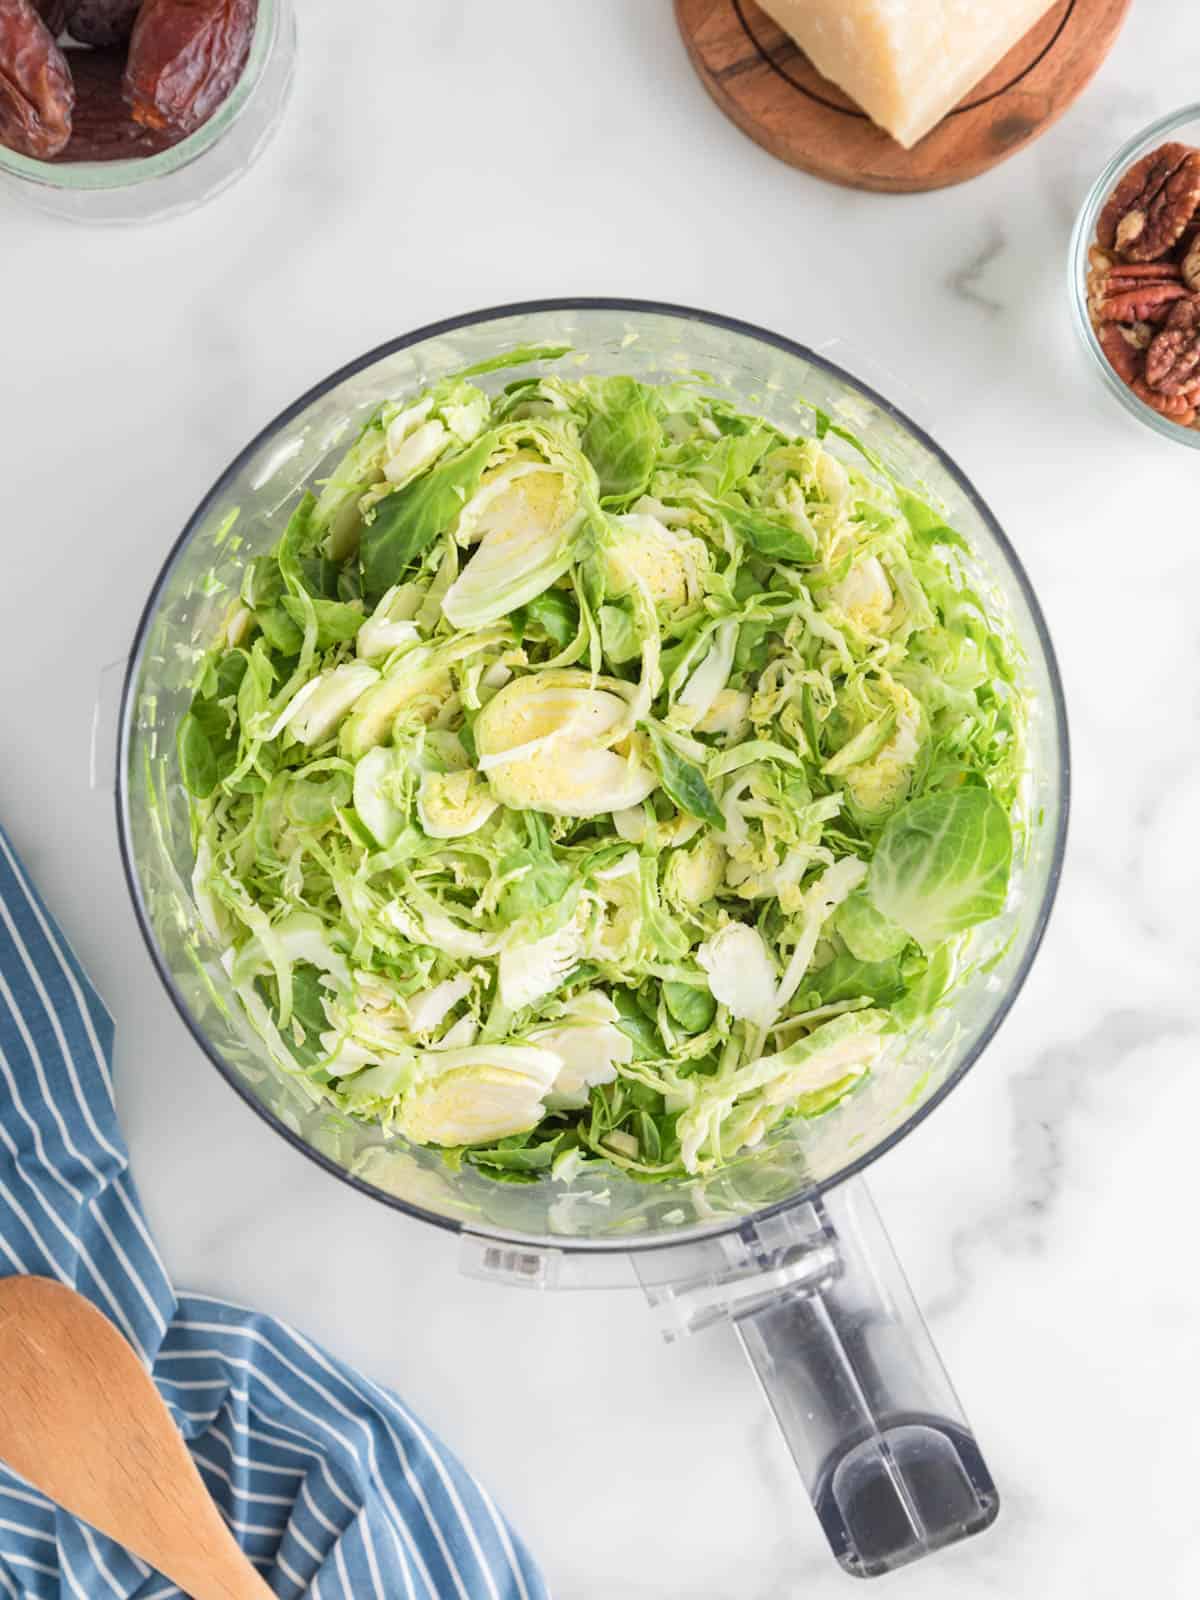 Shaved or shredded Brussels sprouts in food processor bowl.